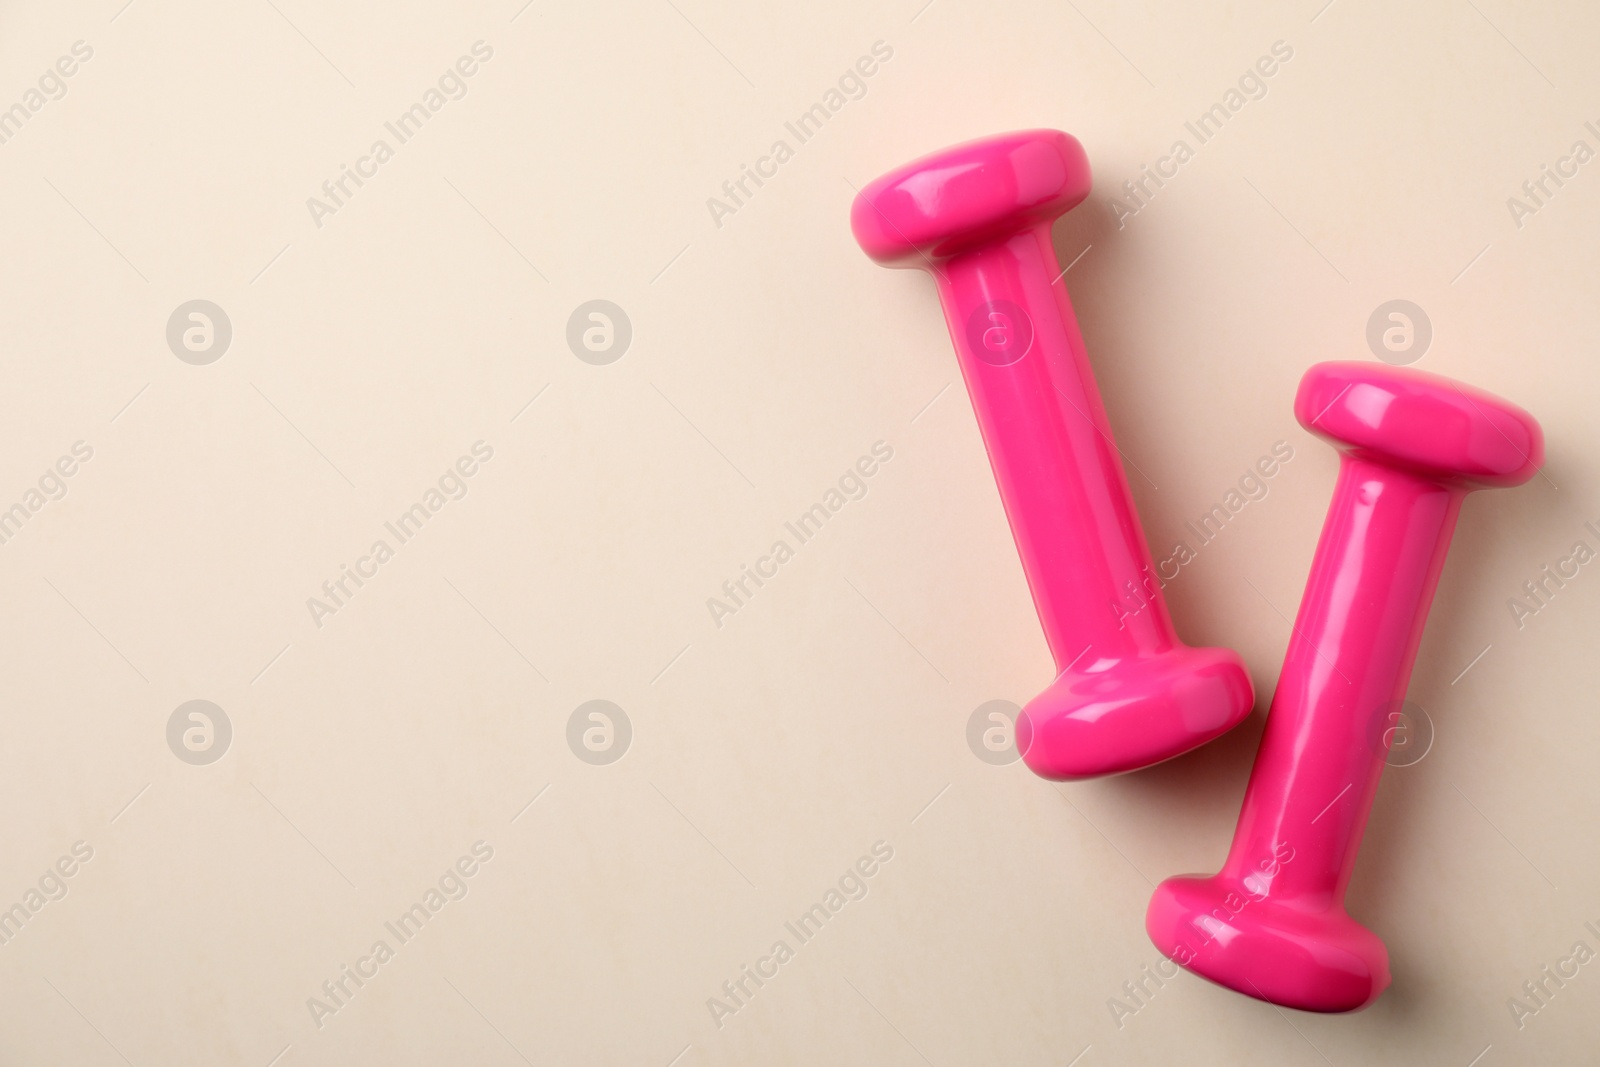 Photo of Bright dumbbells and space for text on color background, flat lay. Home fitness